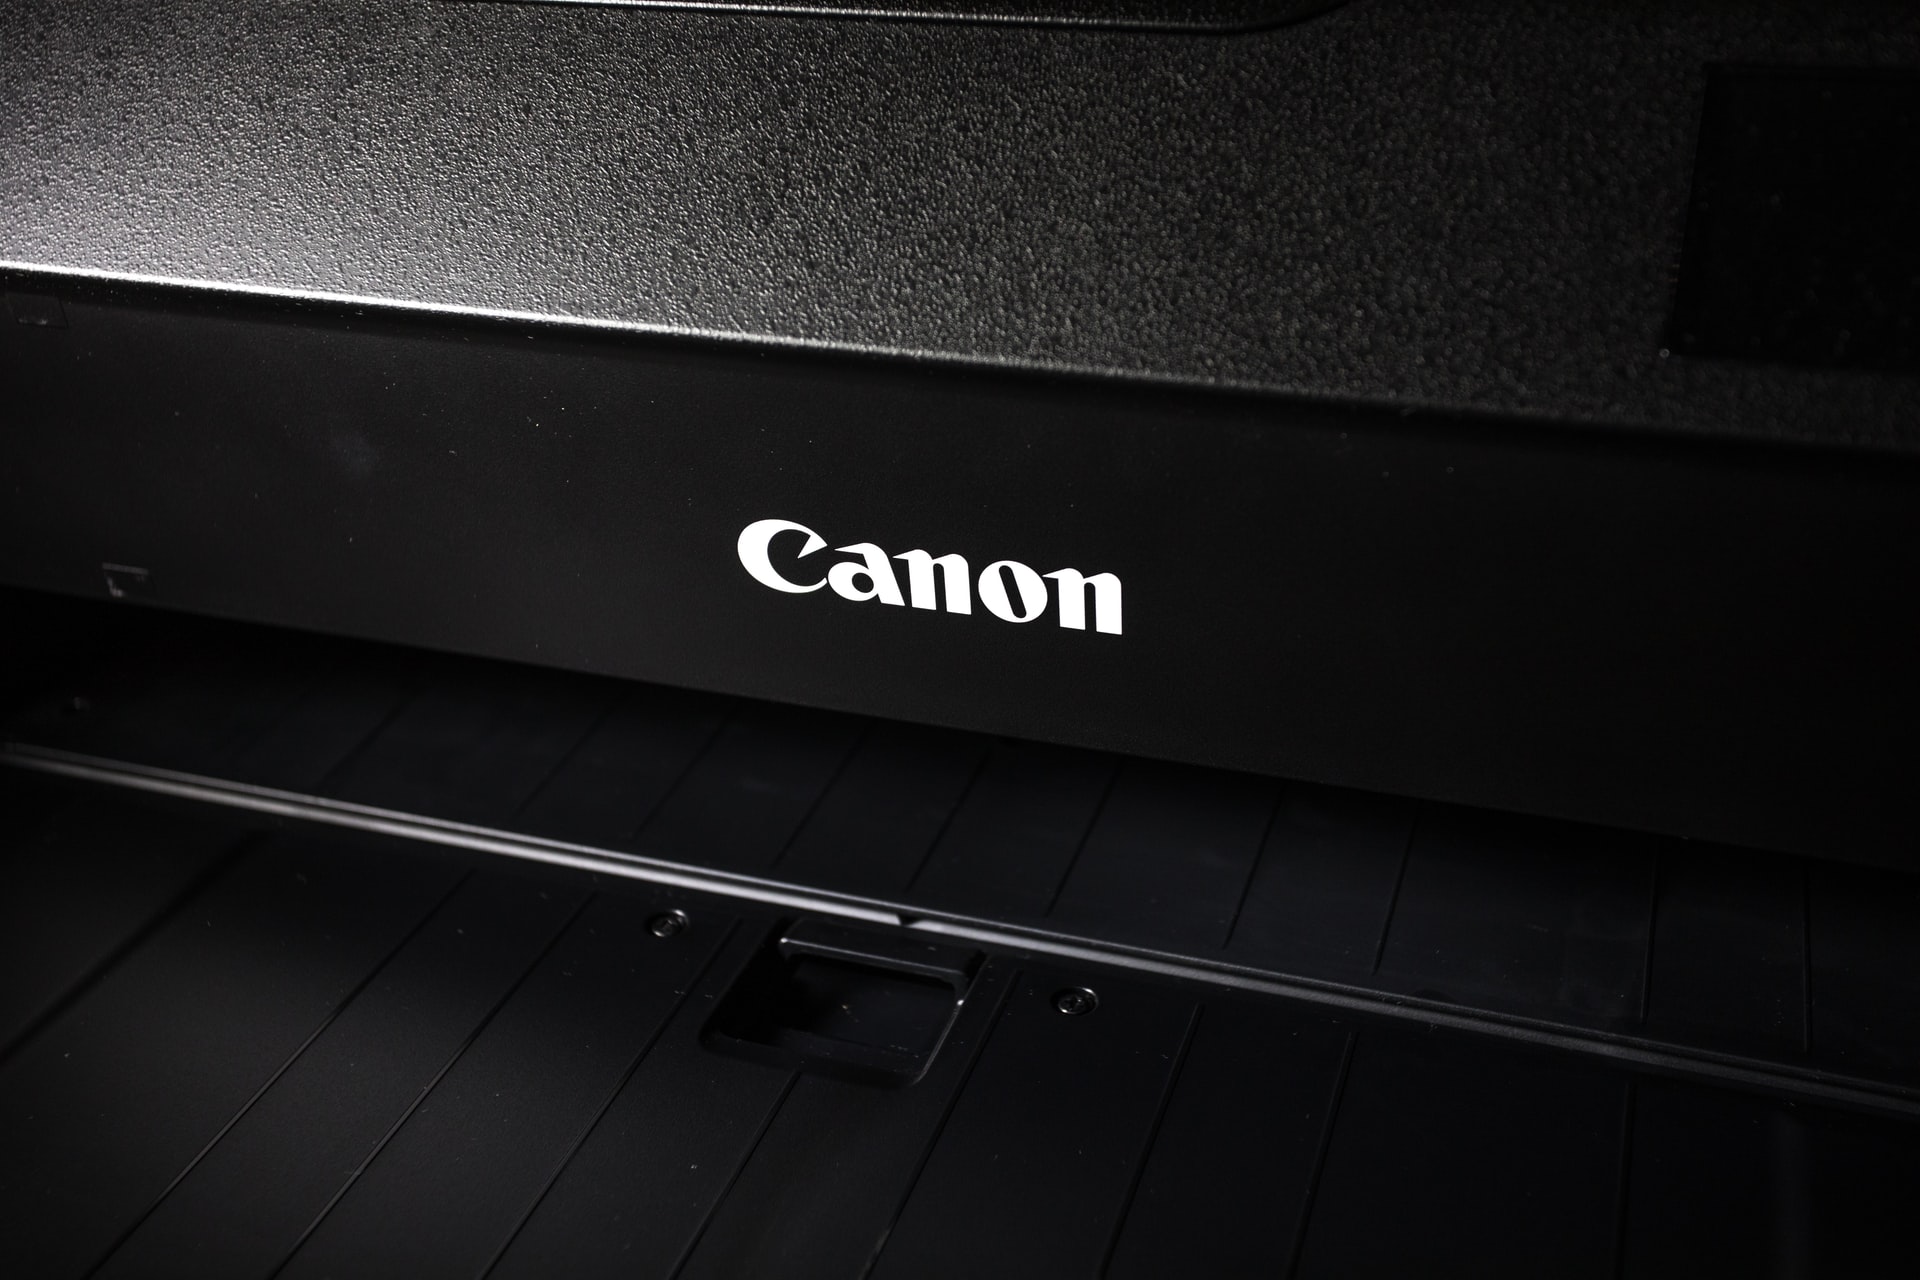 The latest guide to troubleshooting Canon MX922 printer errors